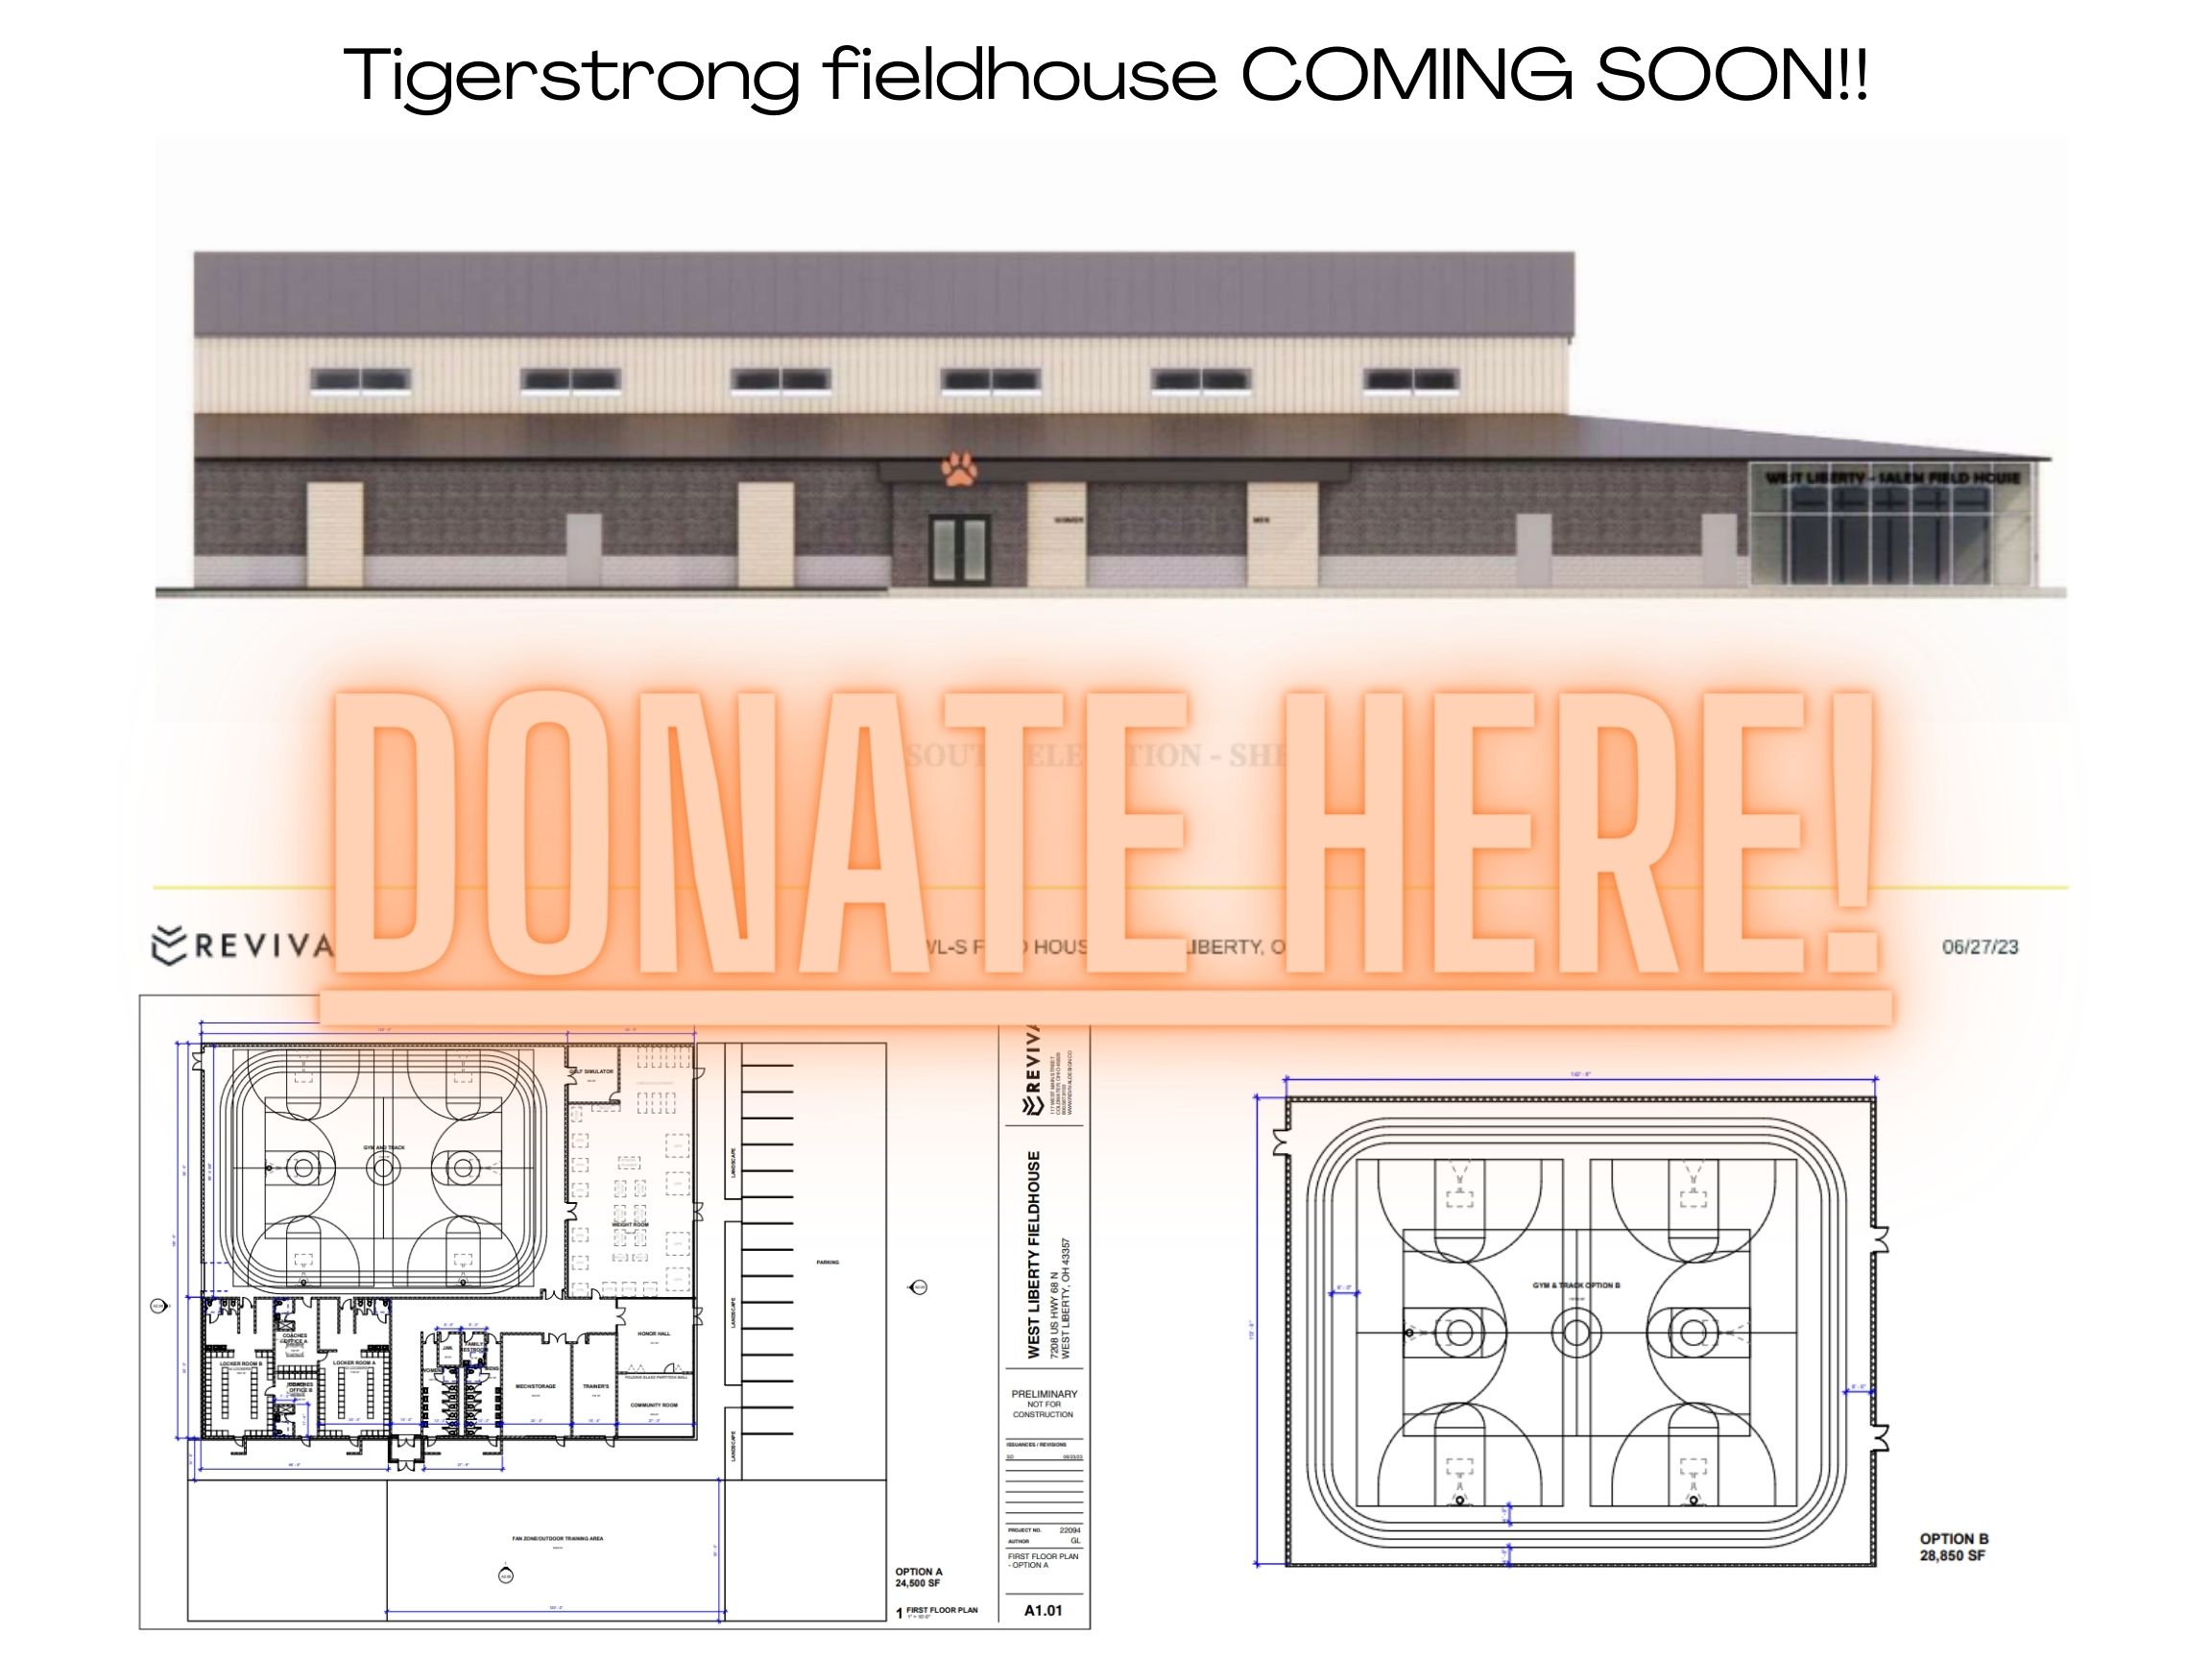 architect's rendering of fieldhouse and floor plan with an embedded link to collect donations